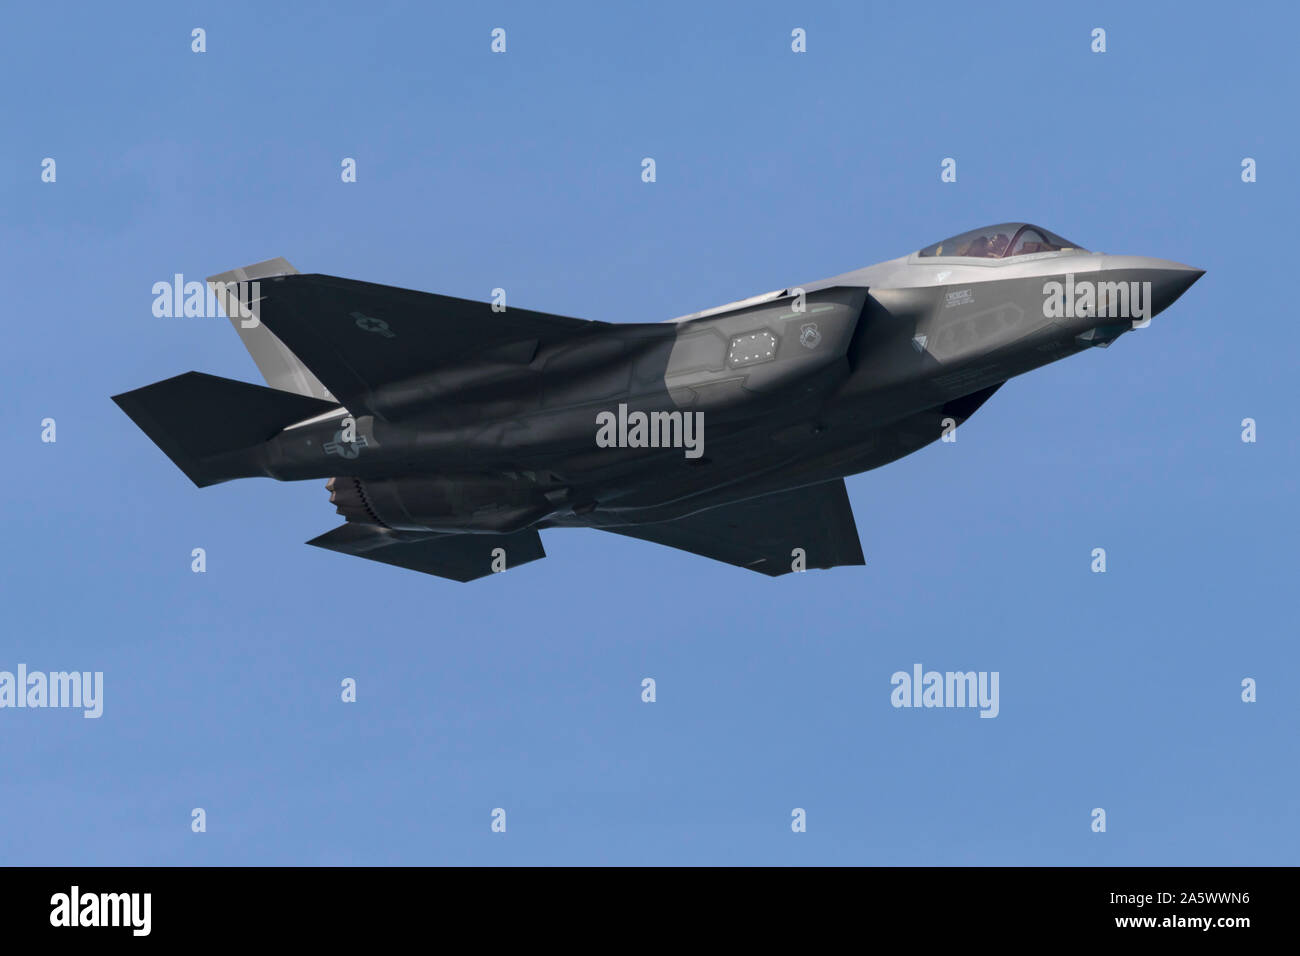 United States Air Force Lockheed Martin F-35 Lightning II fifth generation fighter in volo. Foto Stock